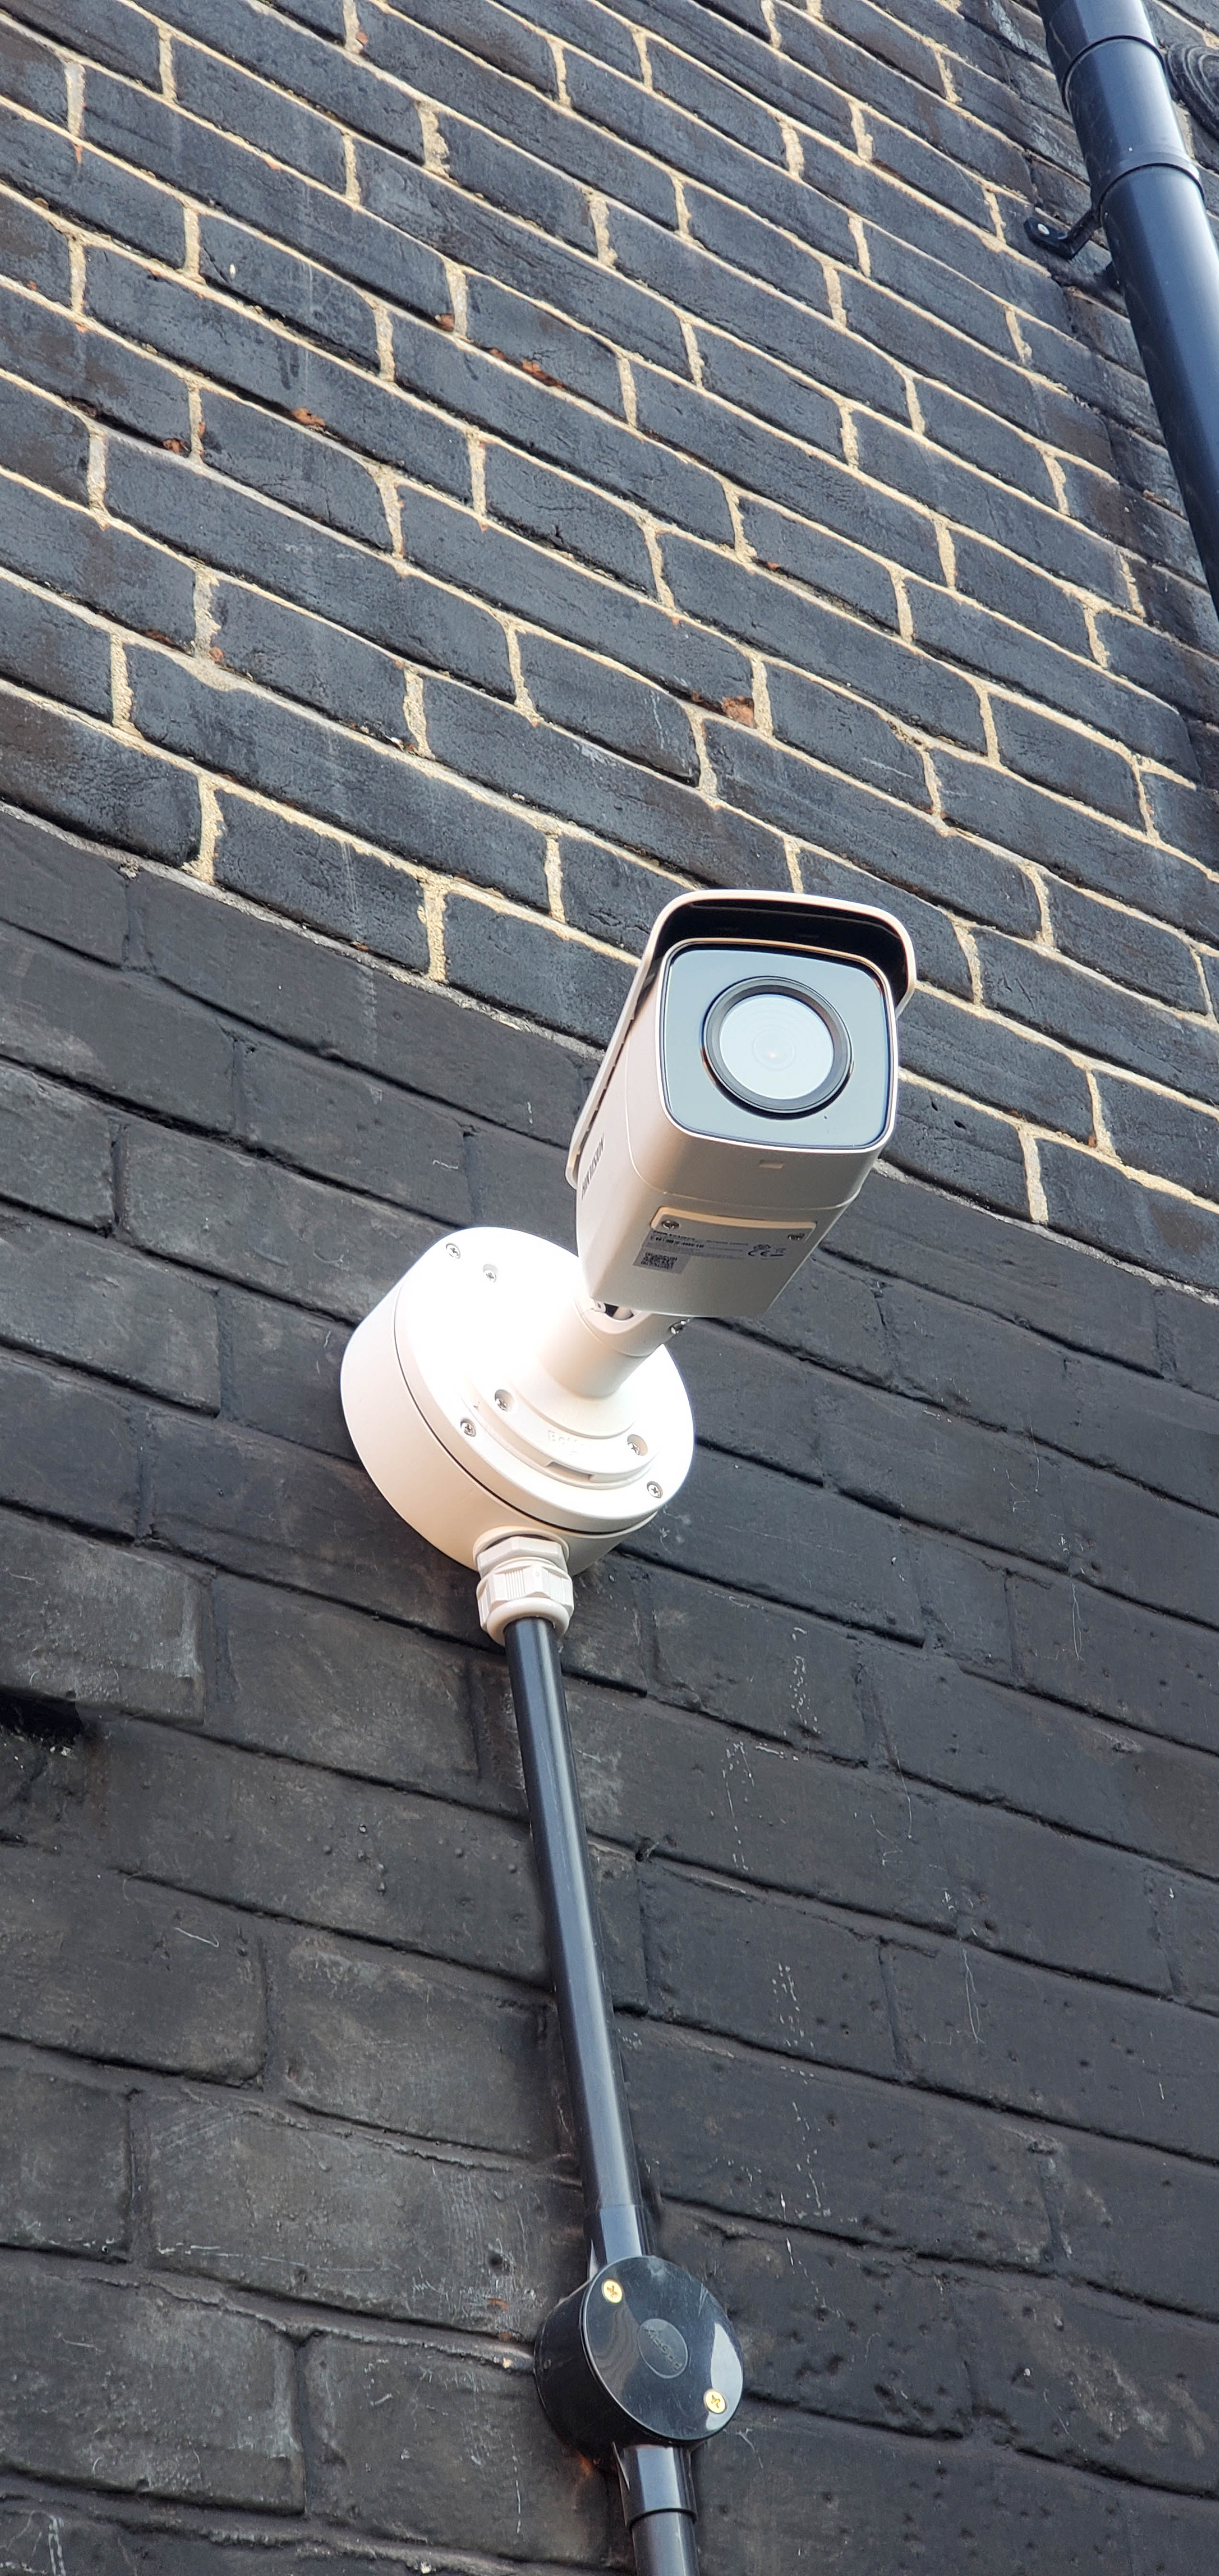 CCTV camera bolted to wall